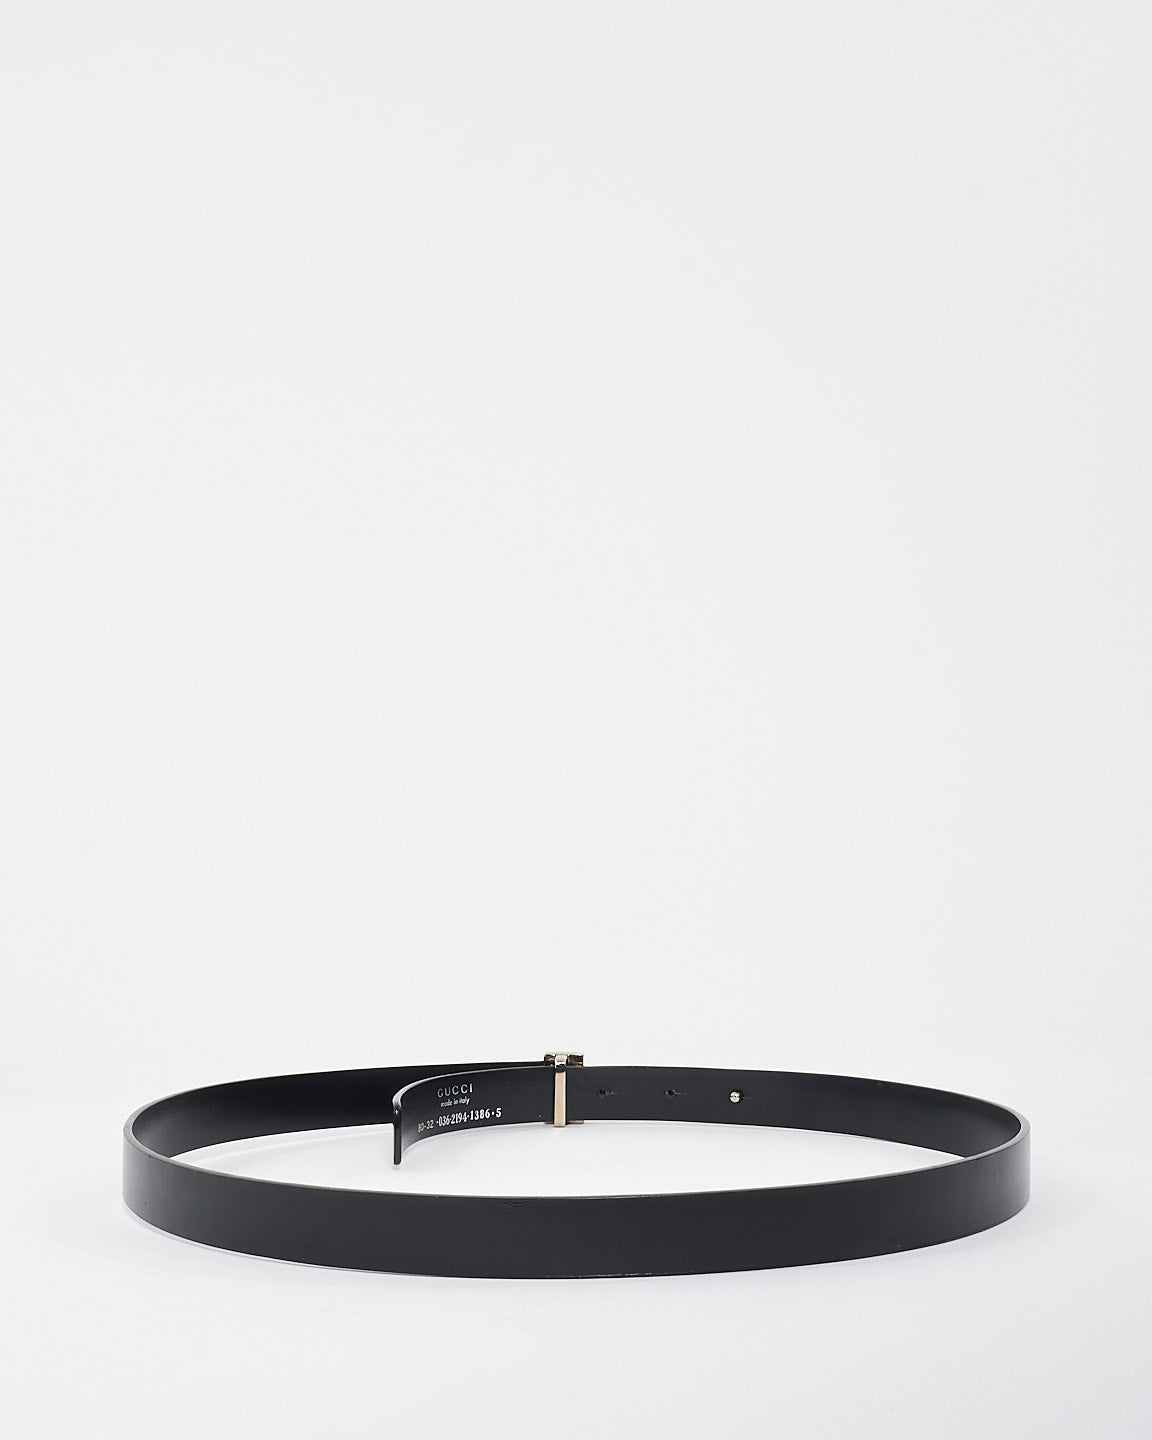 Gucci Black Leather Thin Belt with Silver Buckle - 80/32